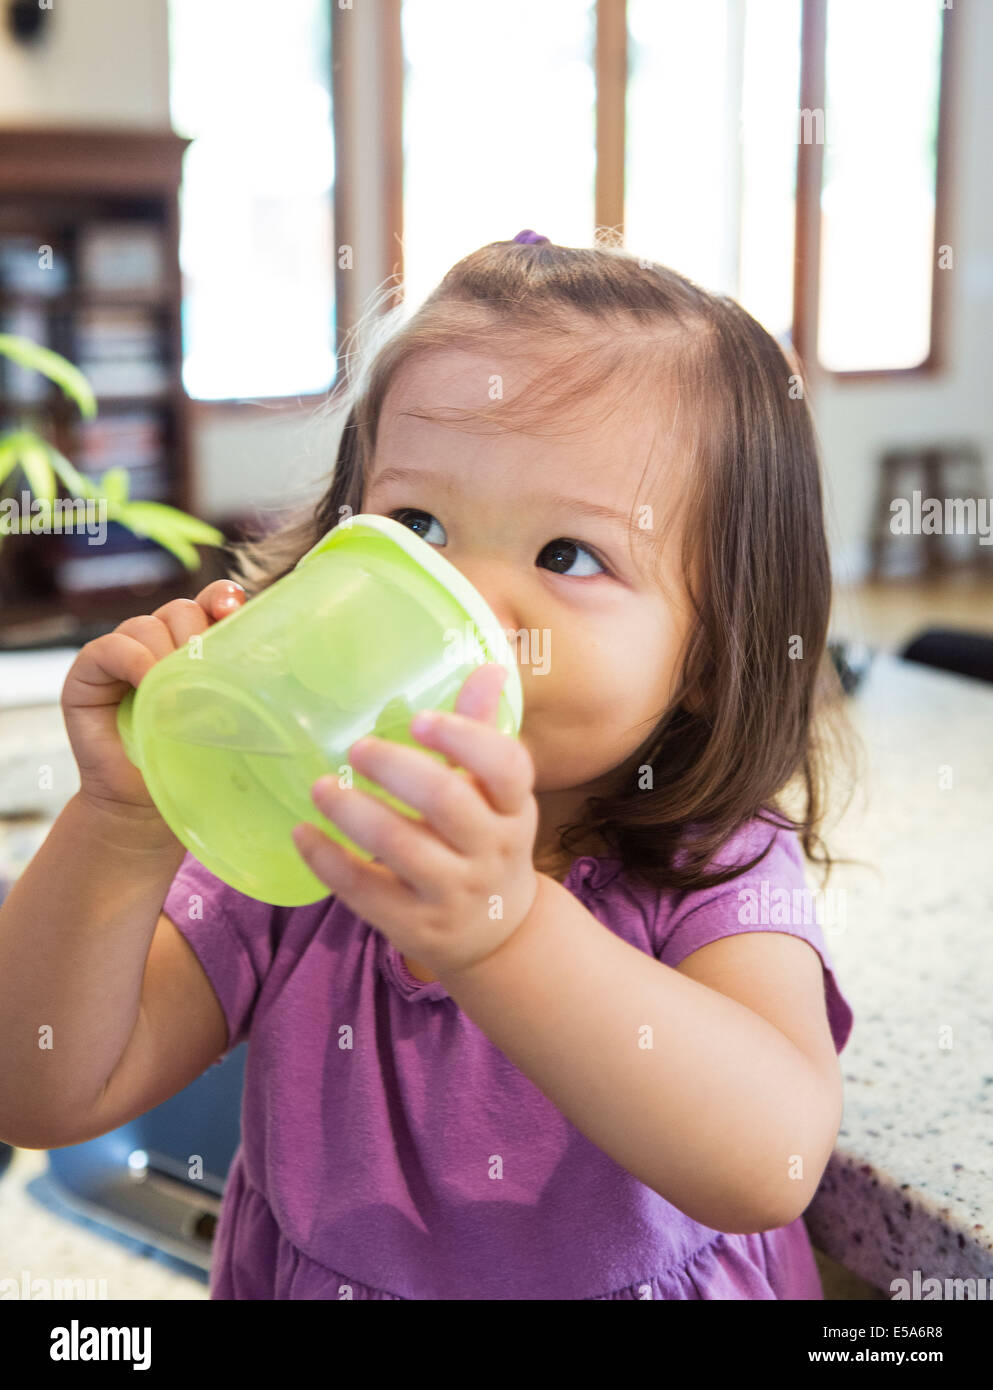 6,478 Toddler Drinking Cup Images, Stock Photos, 3D objects, & Vectors